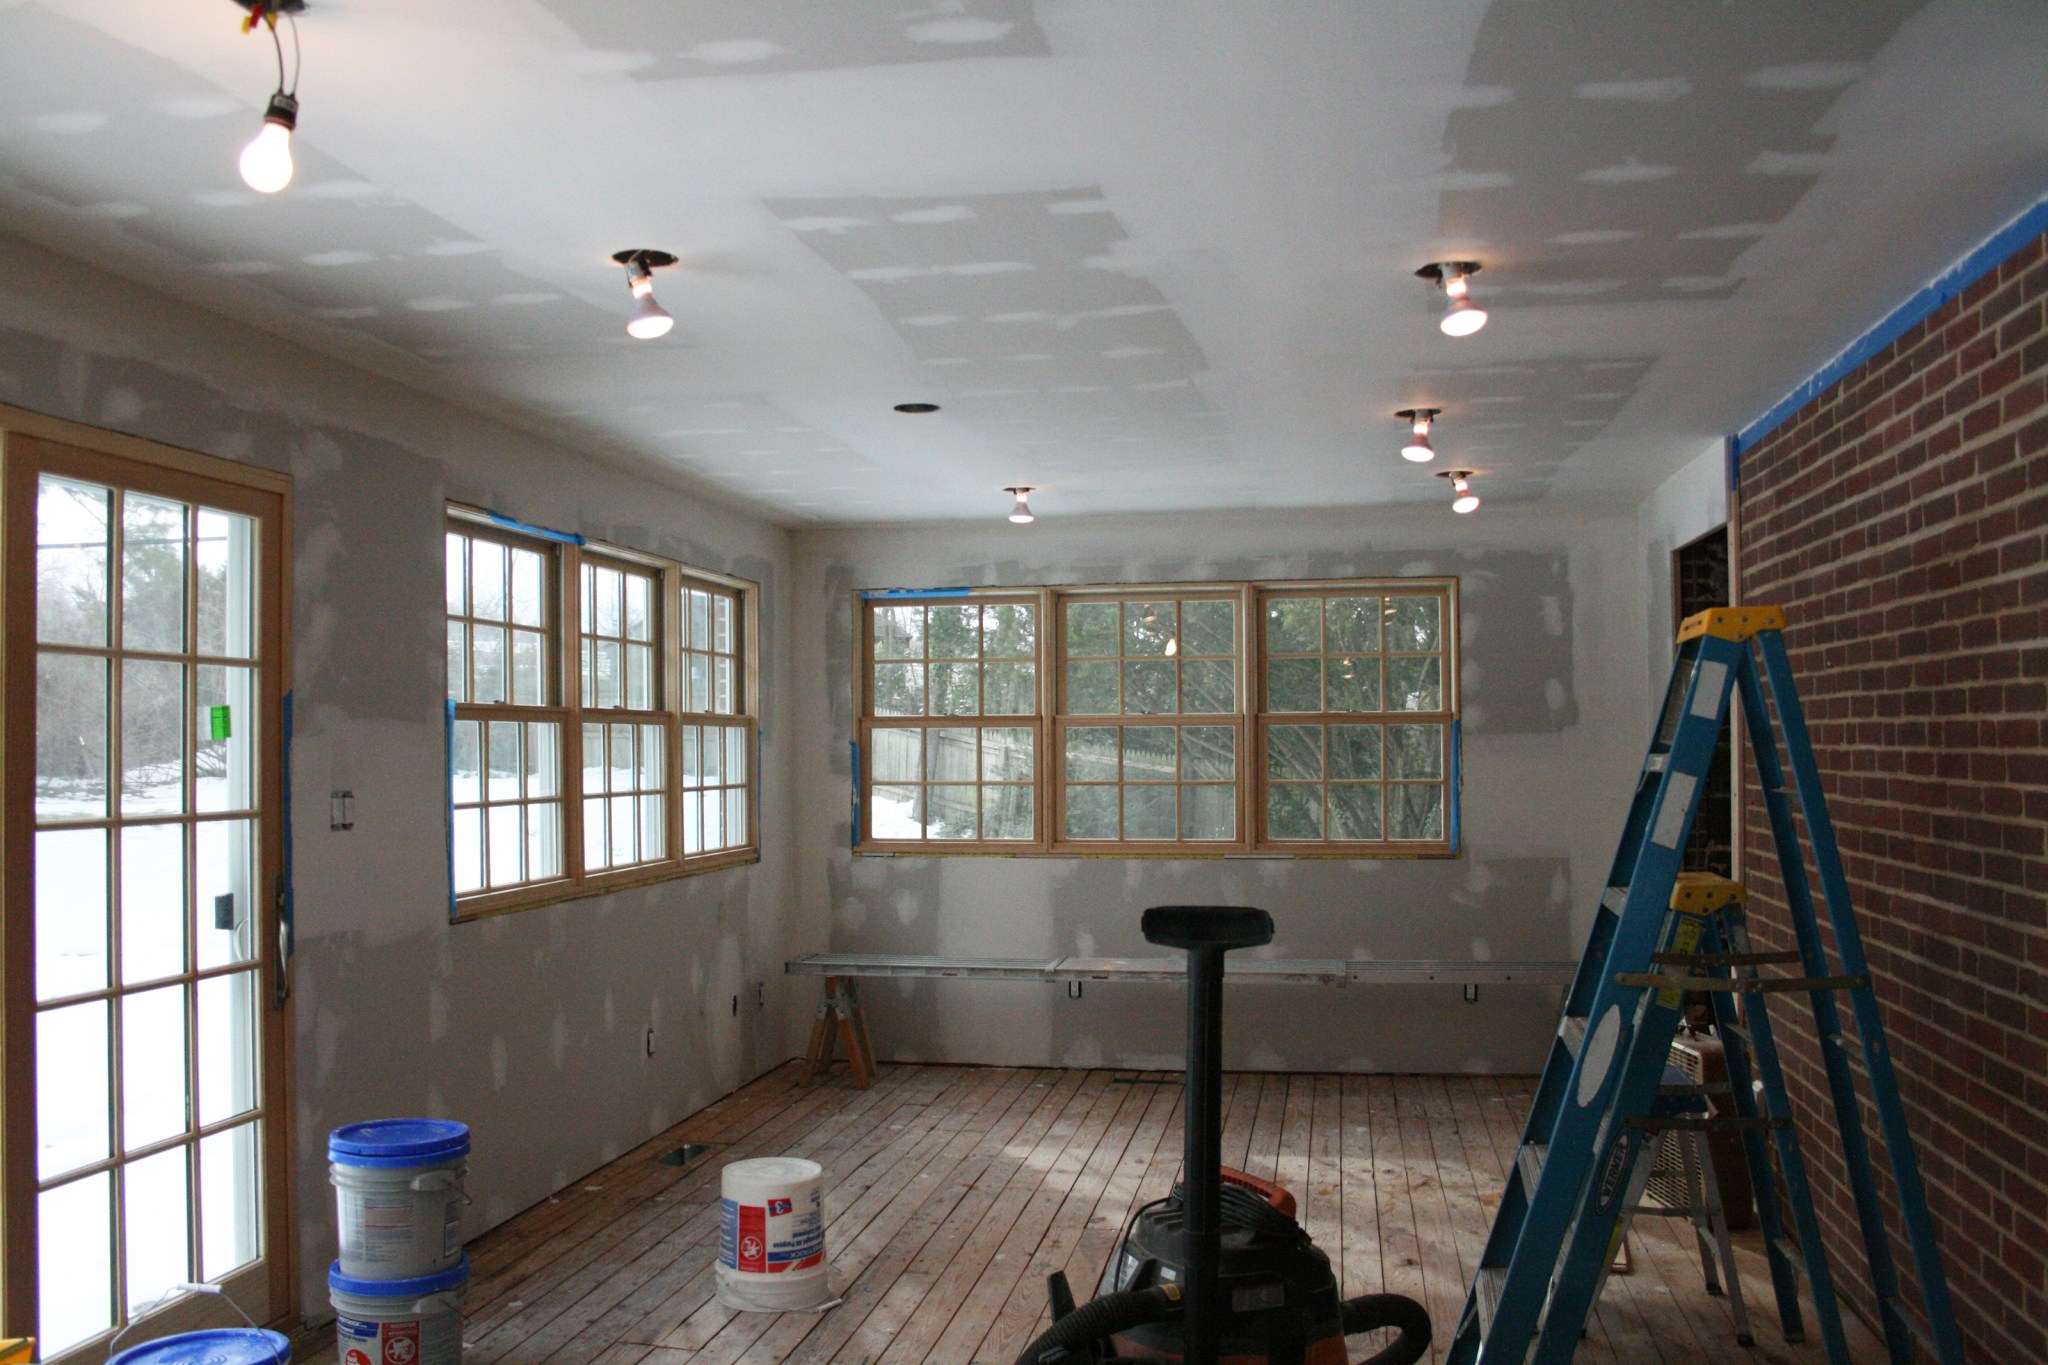 Room in home during construction